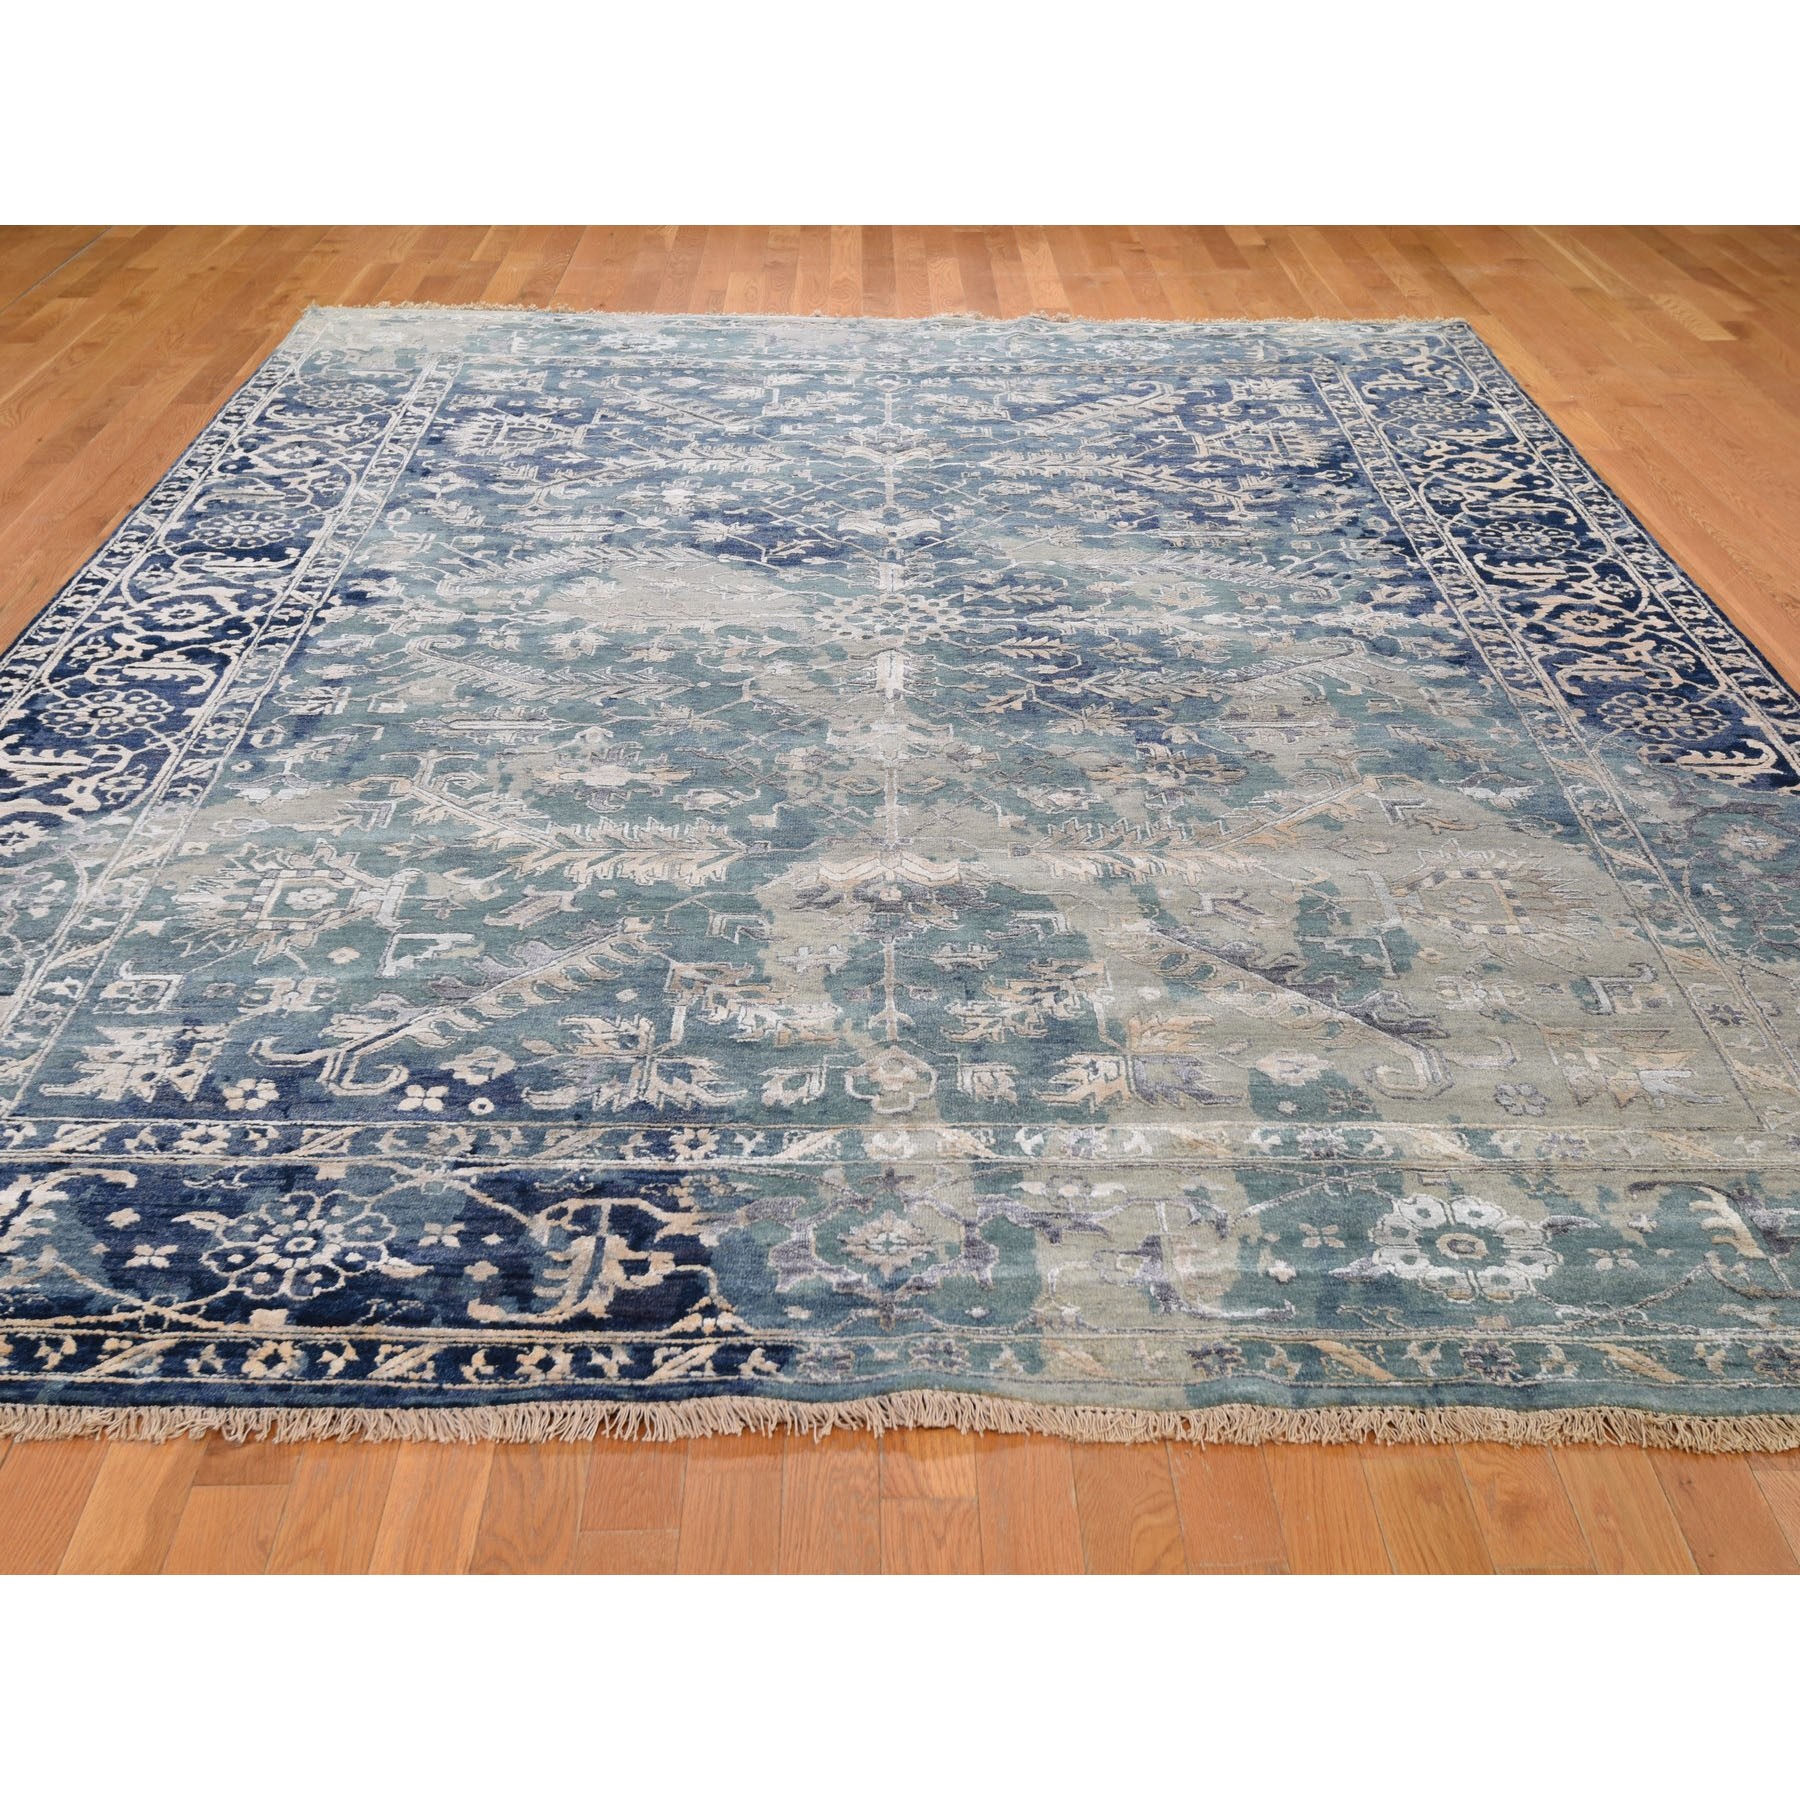 8-10 x12- Broken Persian Heriz All Over Design Wool And Silk Hand Knotted Oriental Rug 